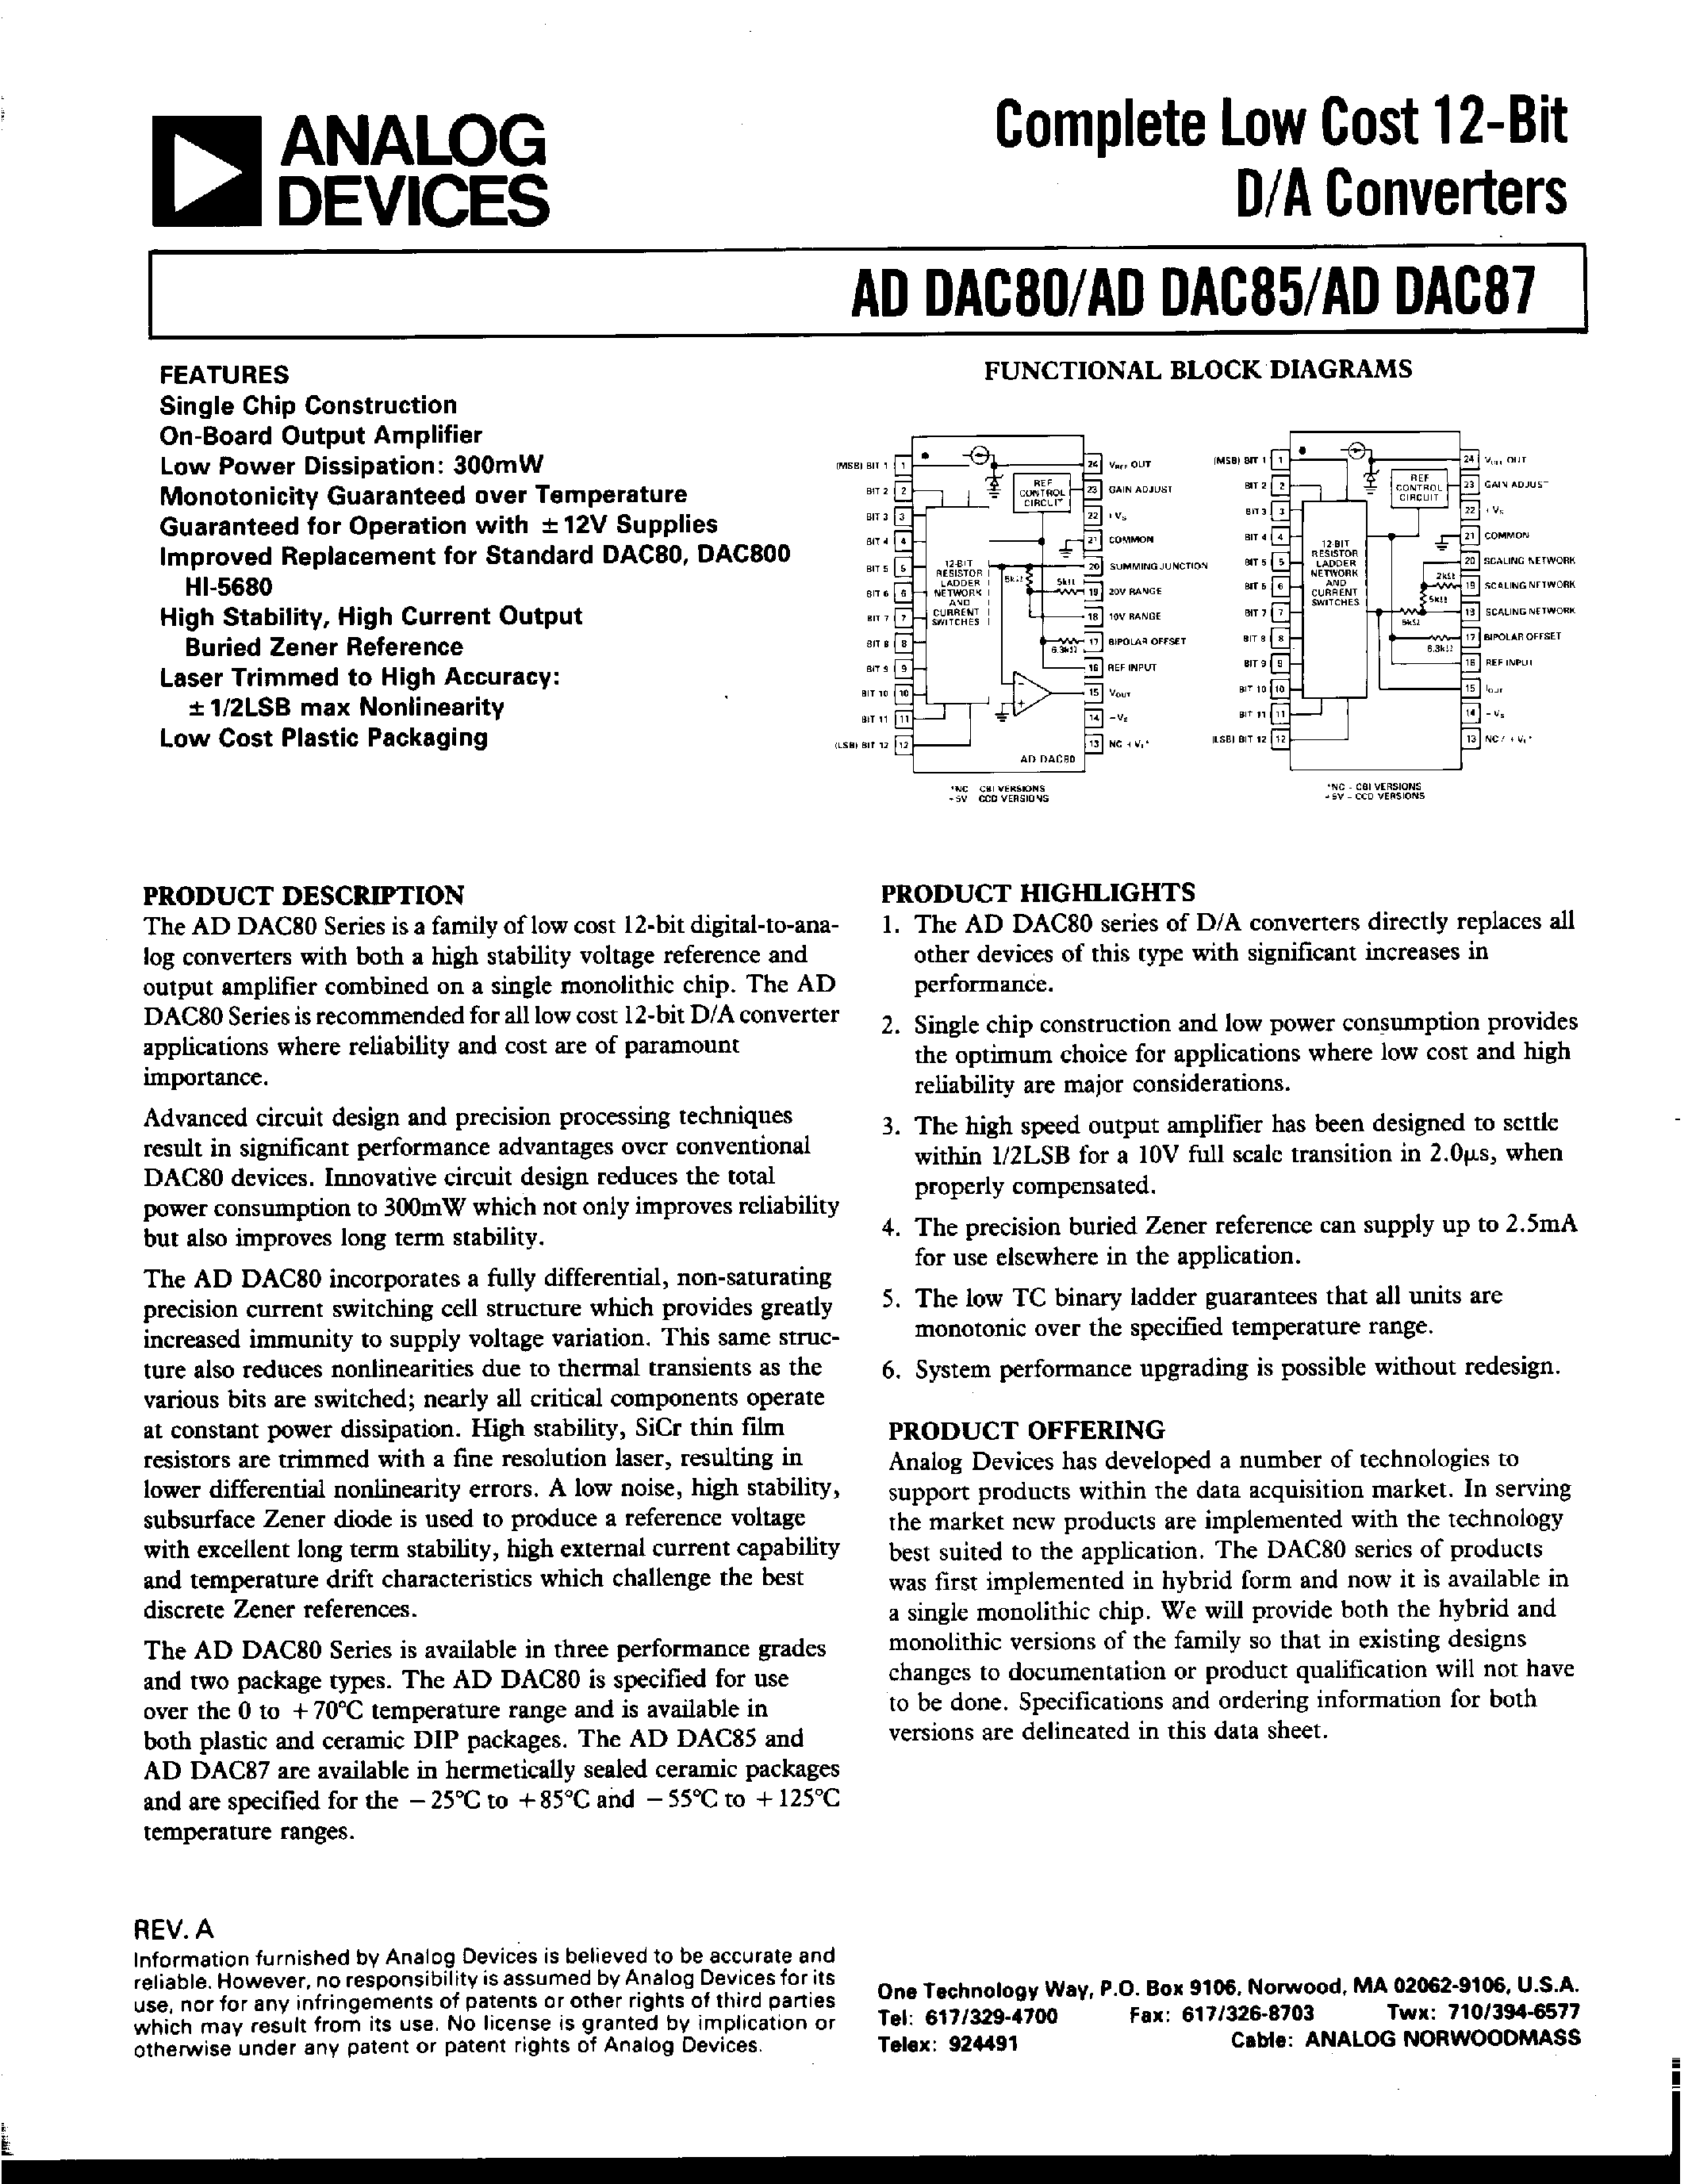 Datasheet ADDAC80Z-CCD-I - COMPLETE LOW COST 12-BIT D/A CONVERTERS page 1